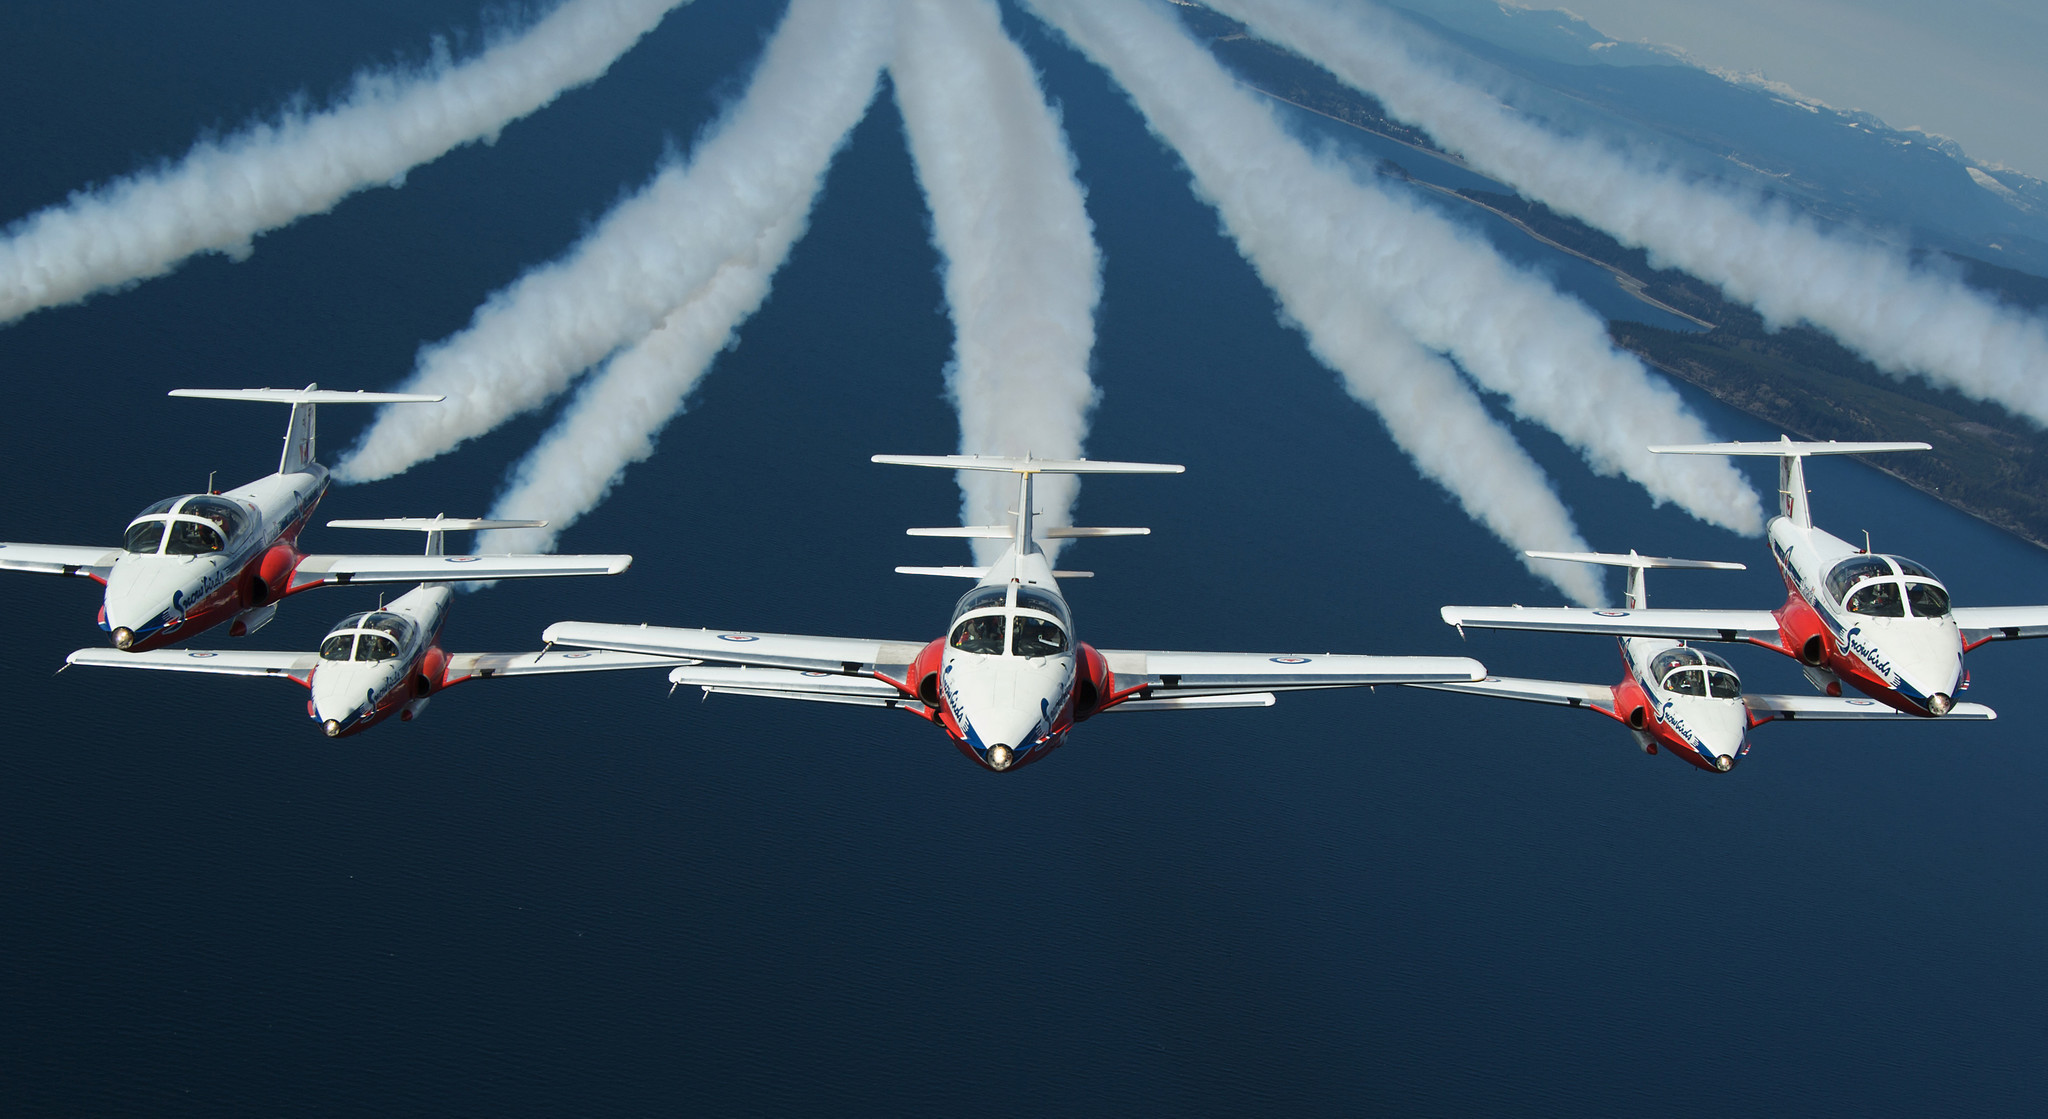 Fort Lauderdale air show back May 6-7 - Sun Sentinel